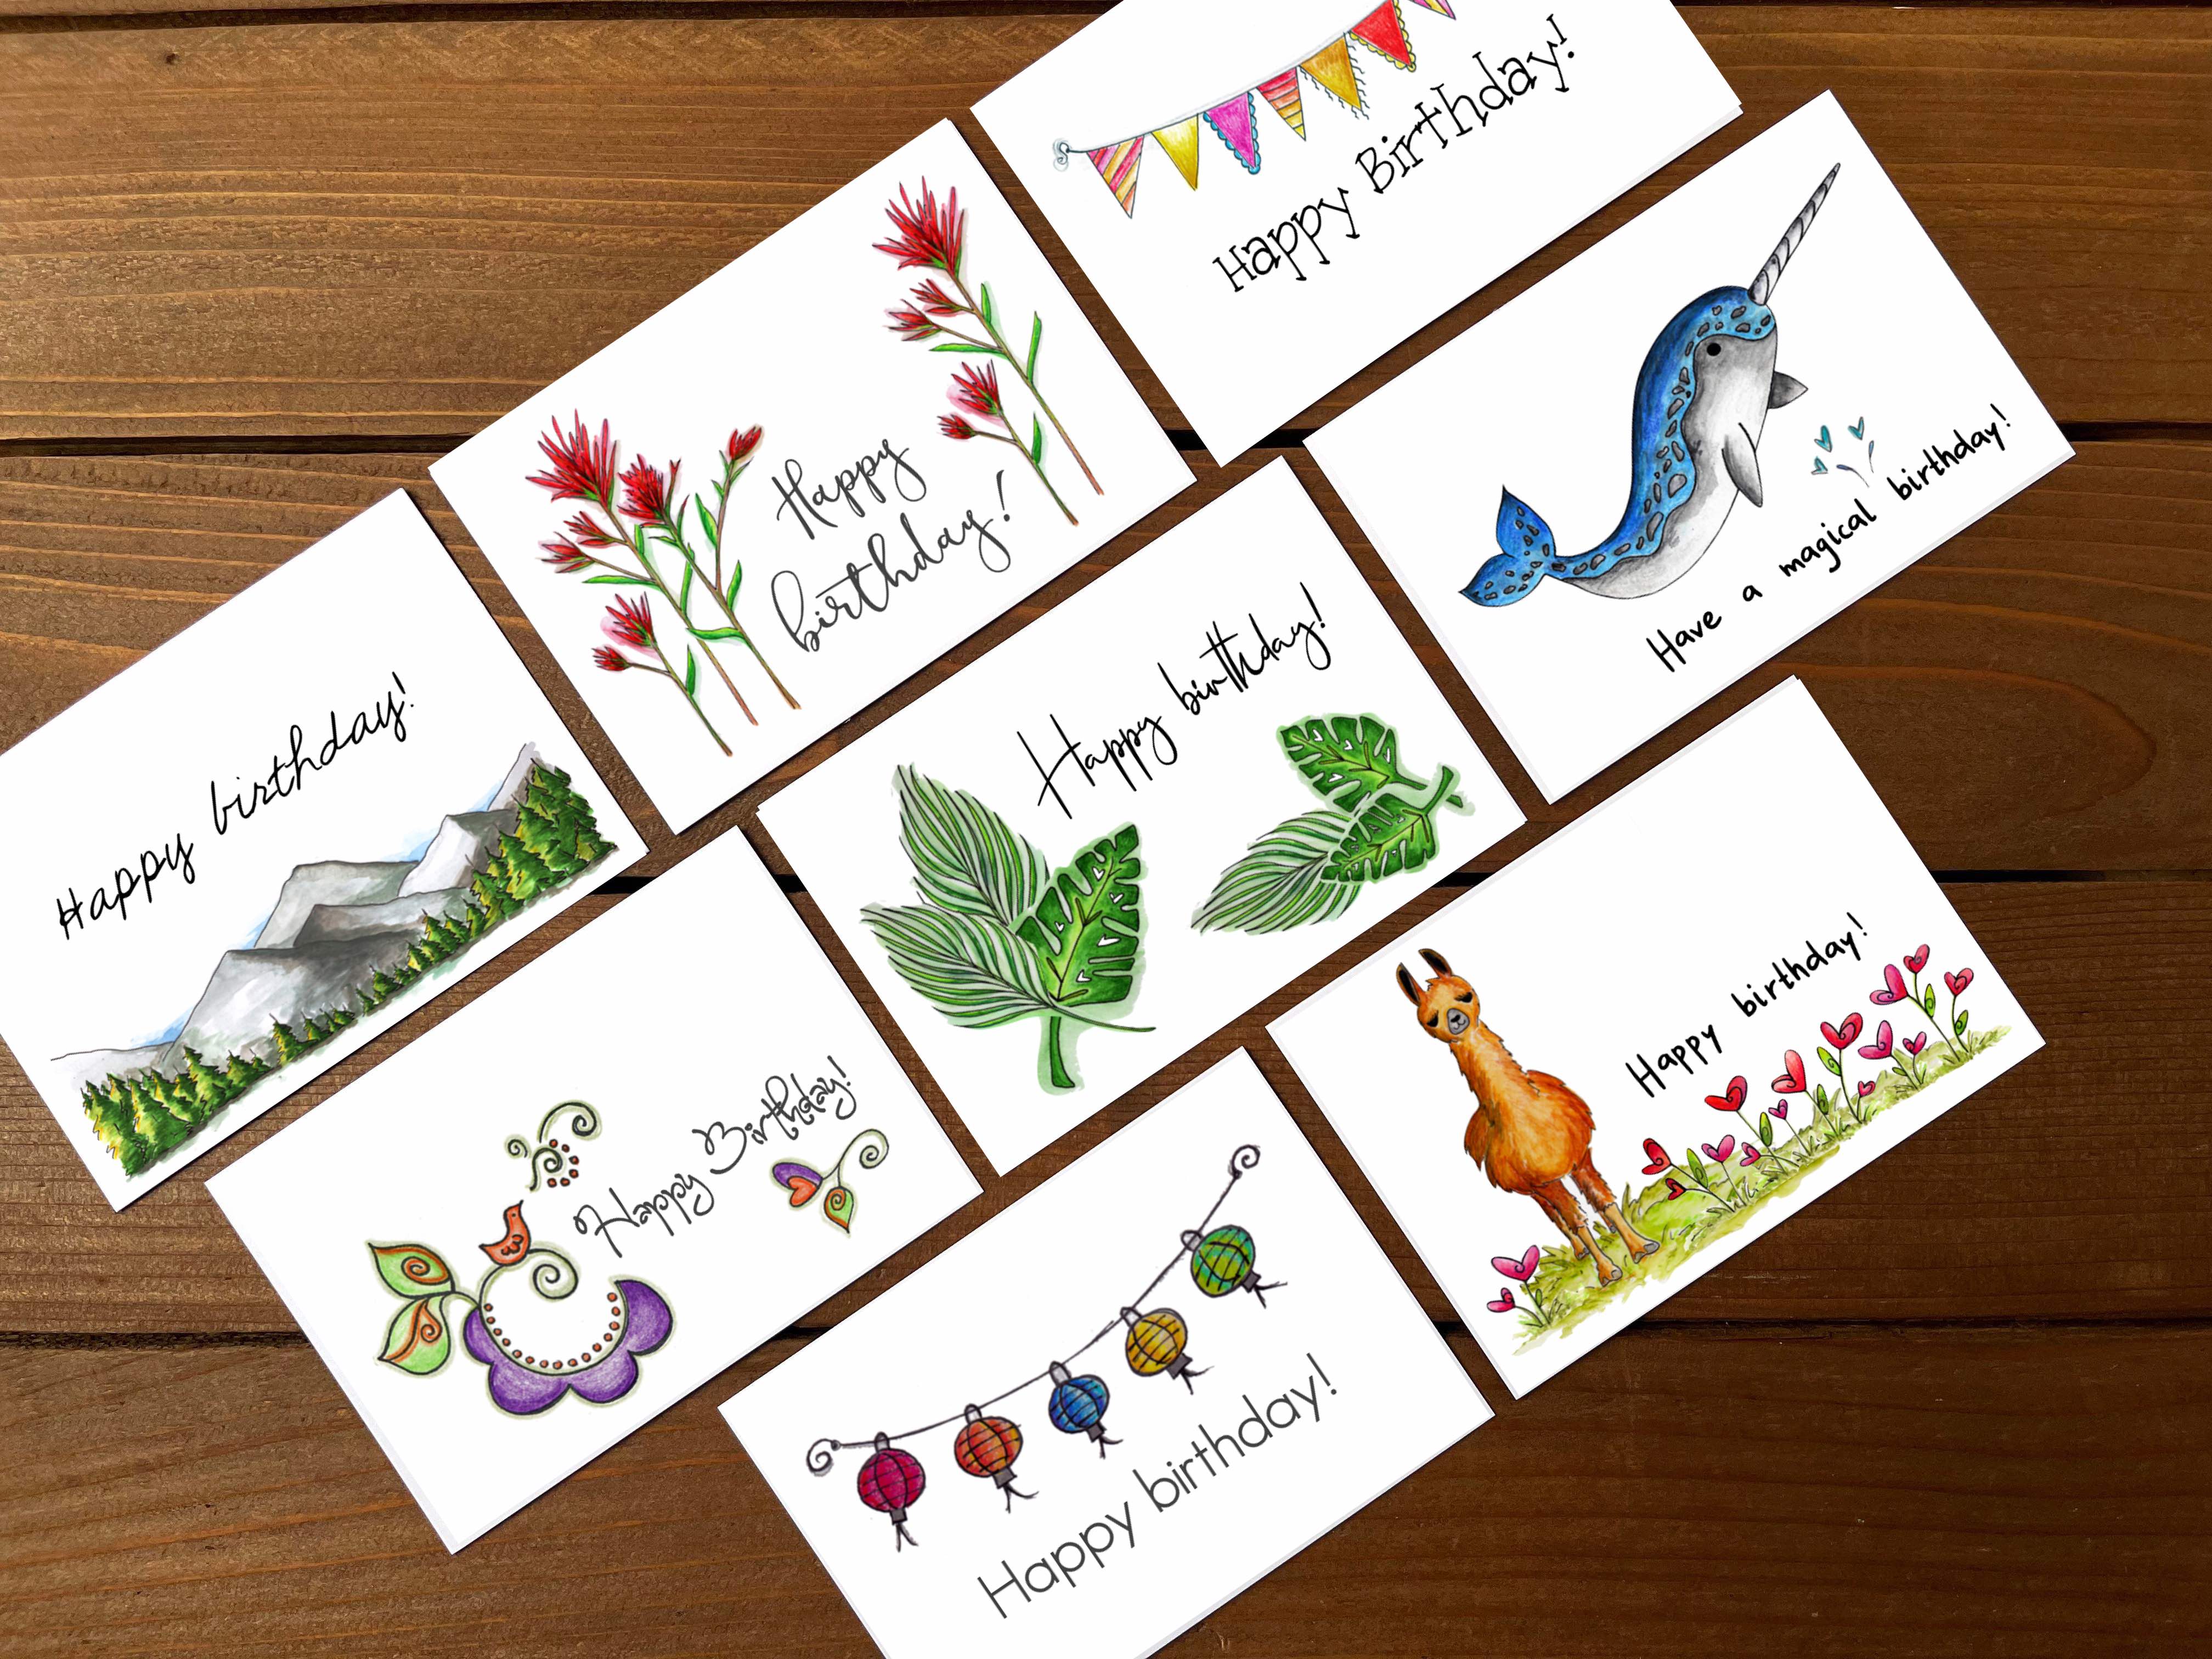 Assorted Birthday Cards - Boxed Set of 8